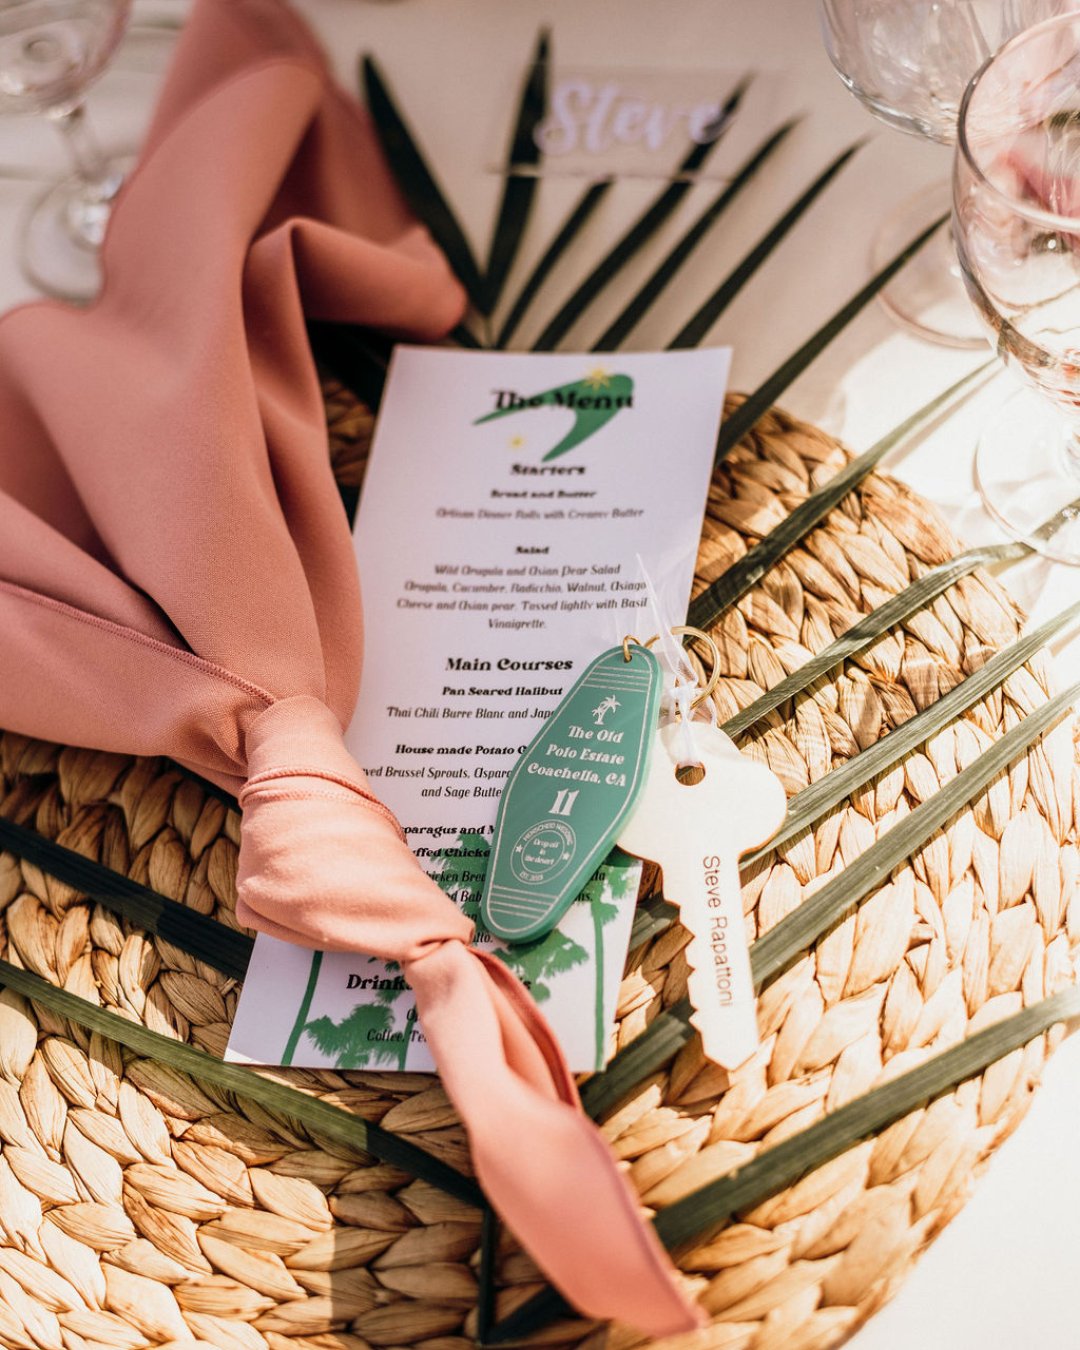 Transported to vacation mode with every detail! 🌴✨ From a seating chart featuring vintage-inspired key tags to a groovy peach and green palette, this reception was pure wanderlust. ⁣
Photo: @everydayforeverweddings⁣
Coordinator: @inspiredlifeevents⁣